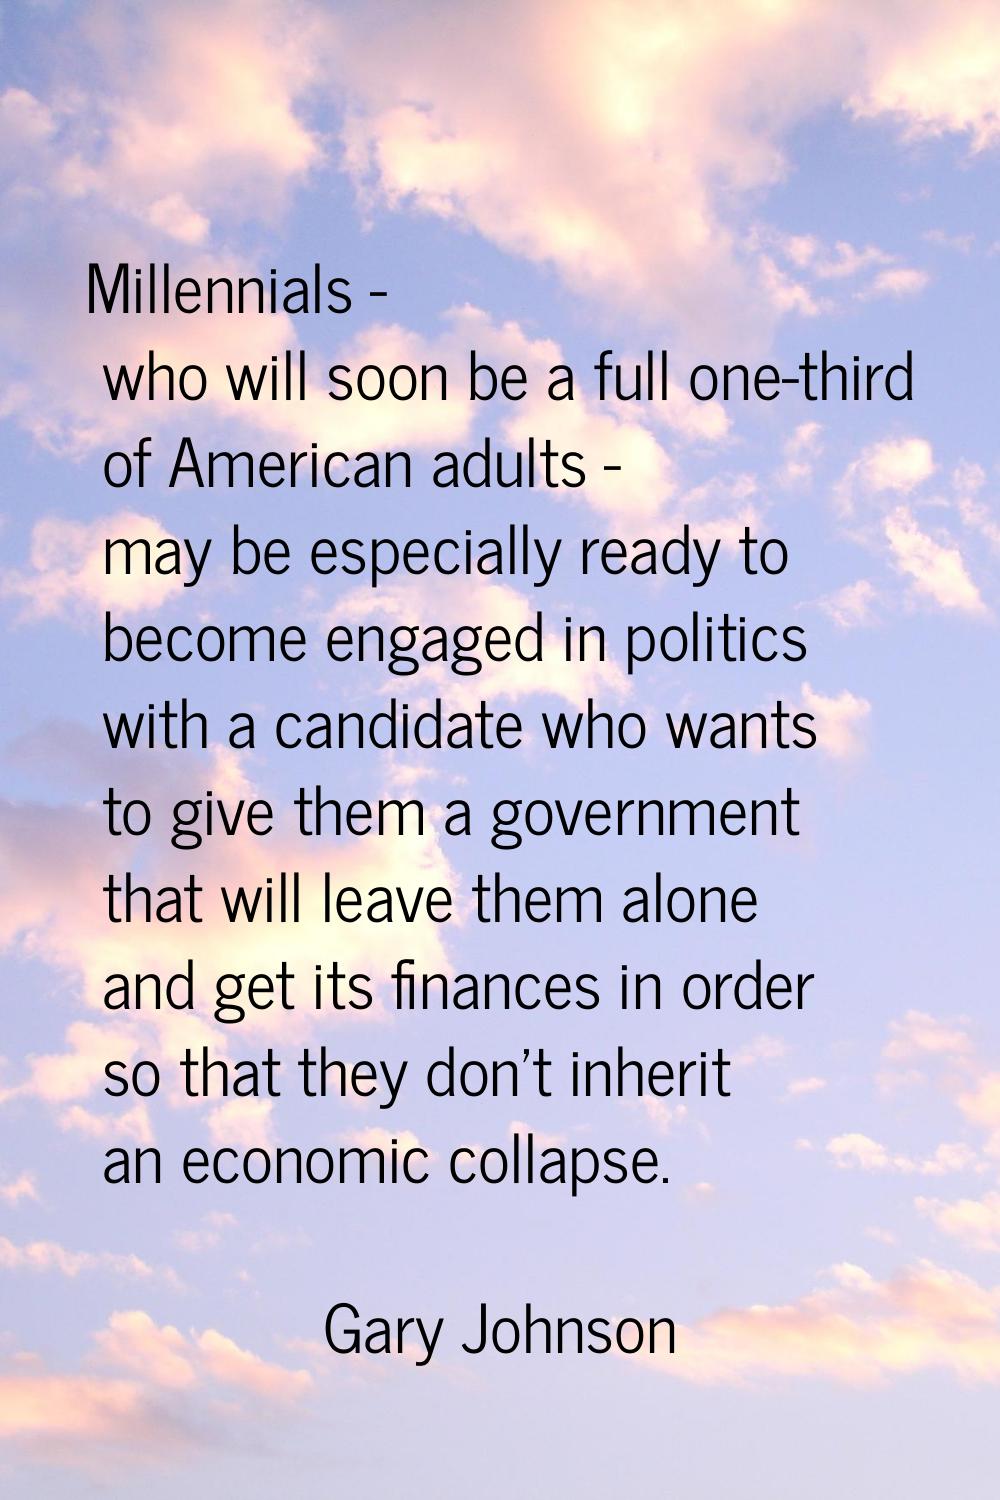 Millennials - who will soon be a full one-third of American adults - may be especially ready to bec